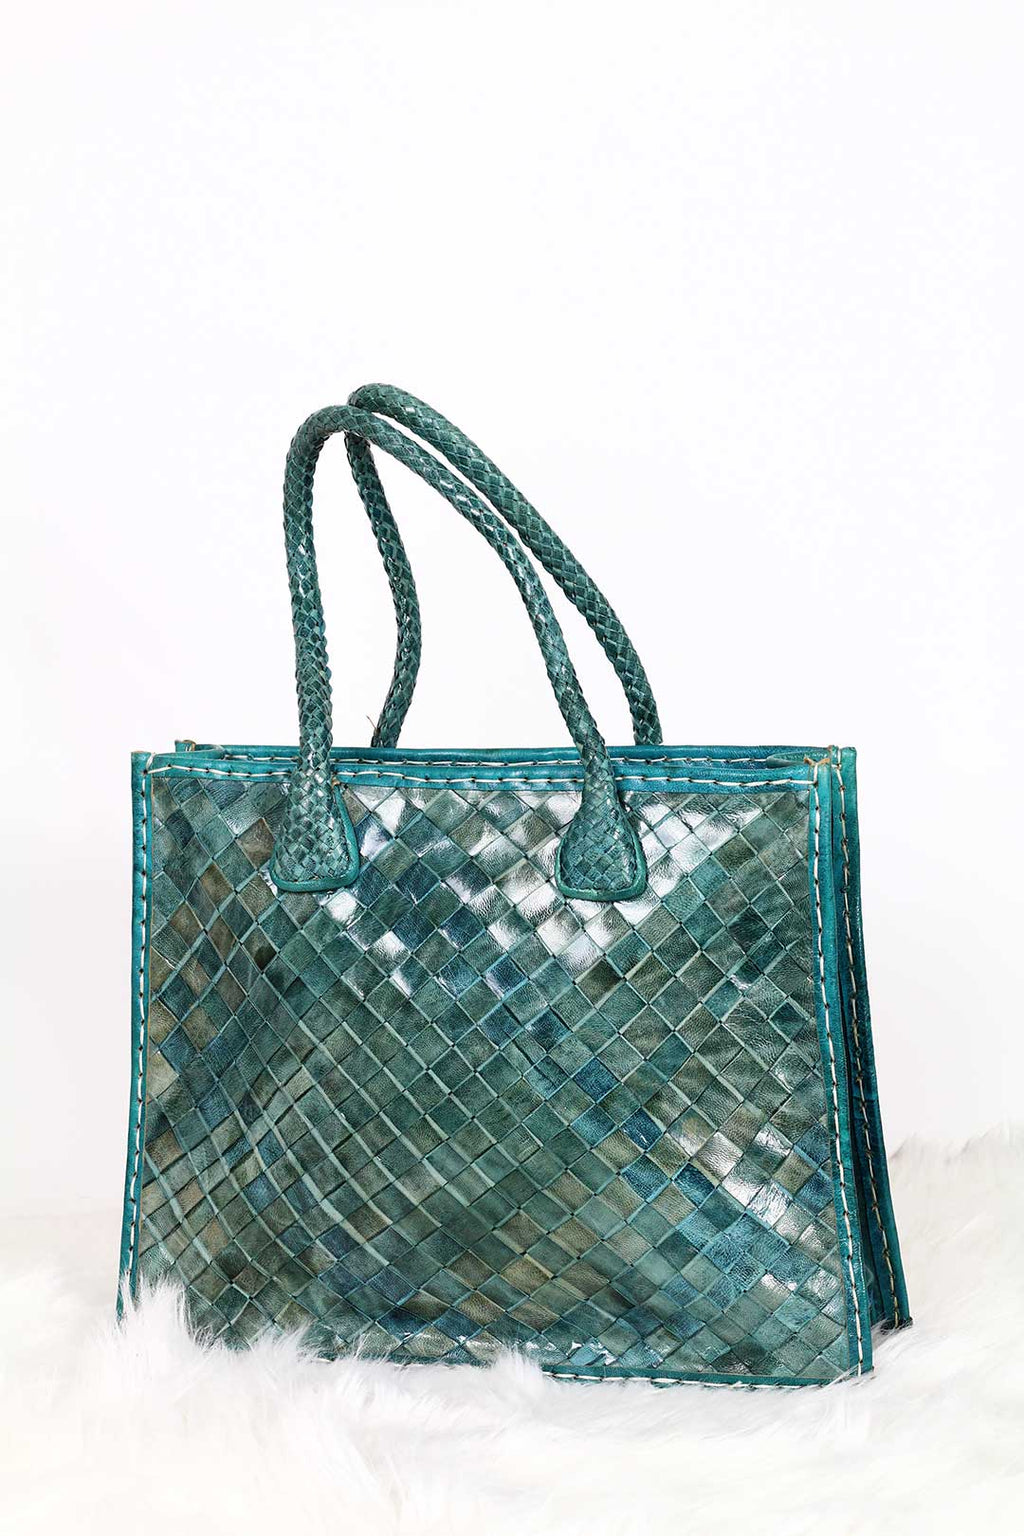 Turquoise Woven Leather Tote bag